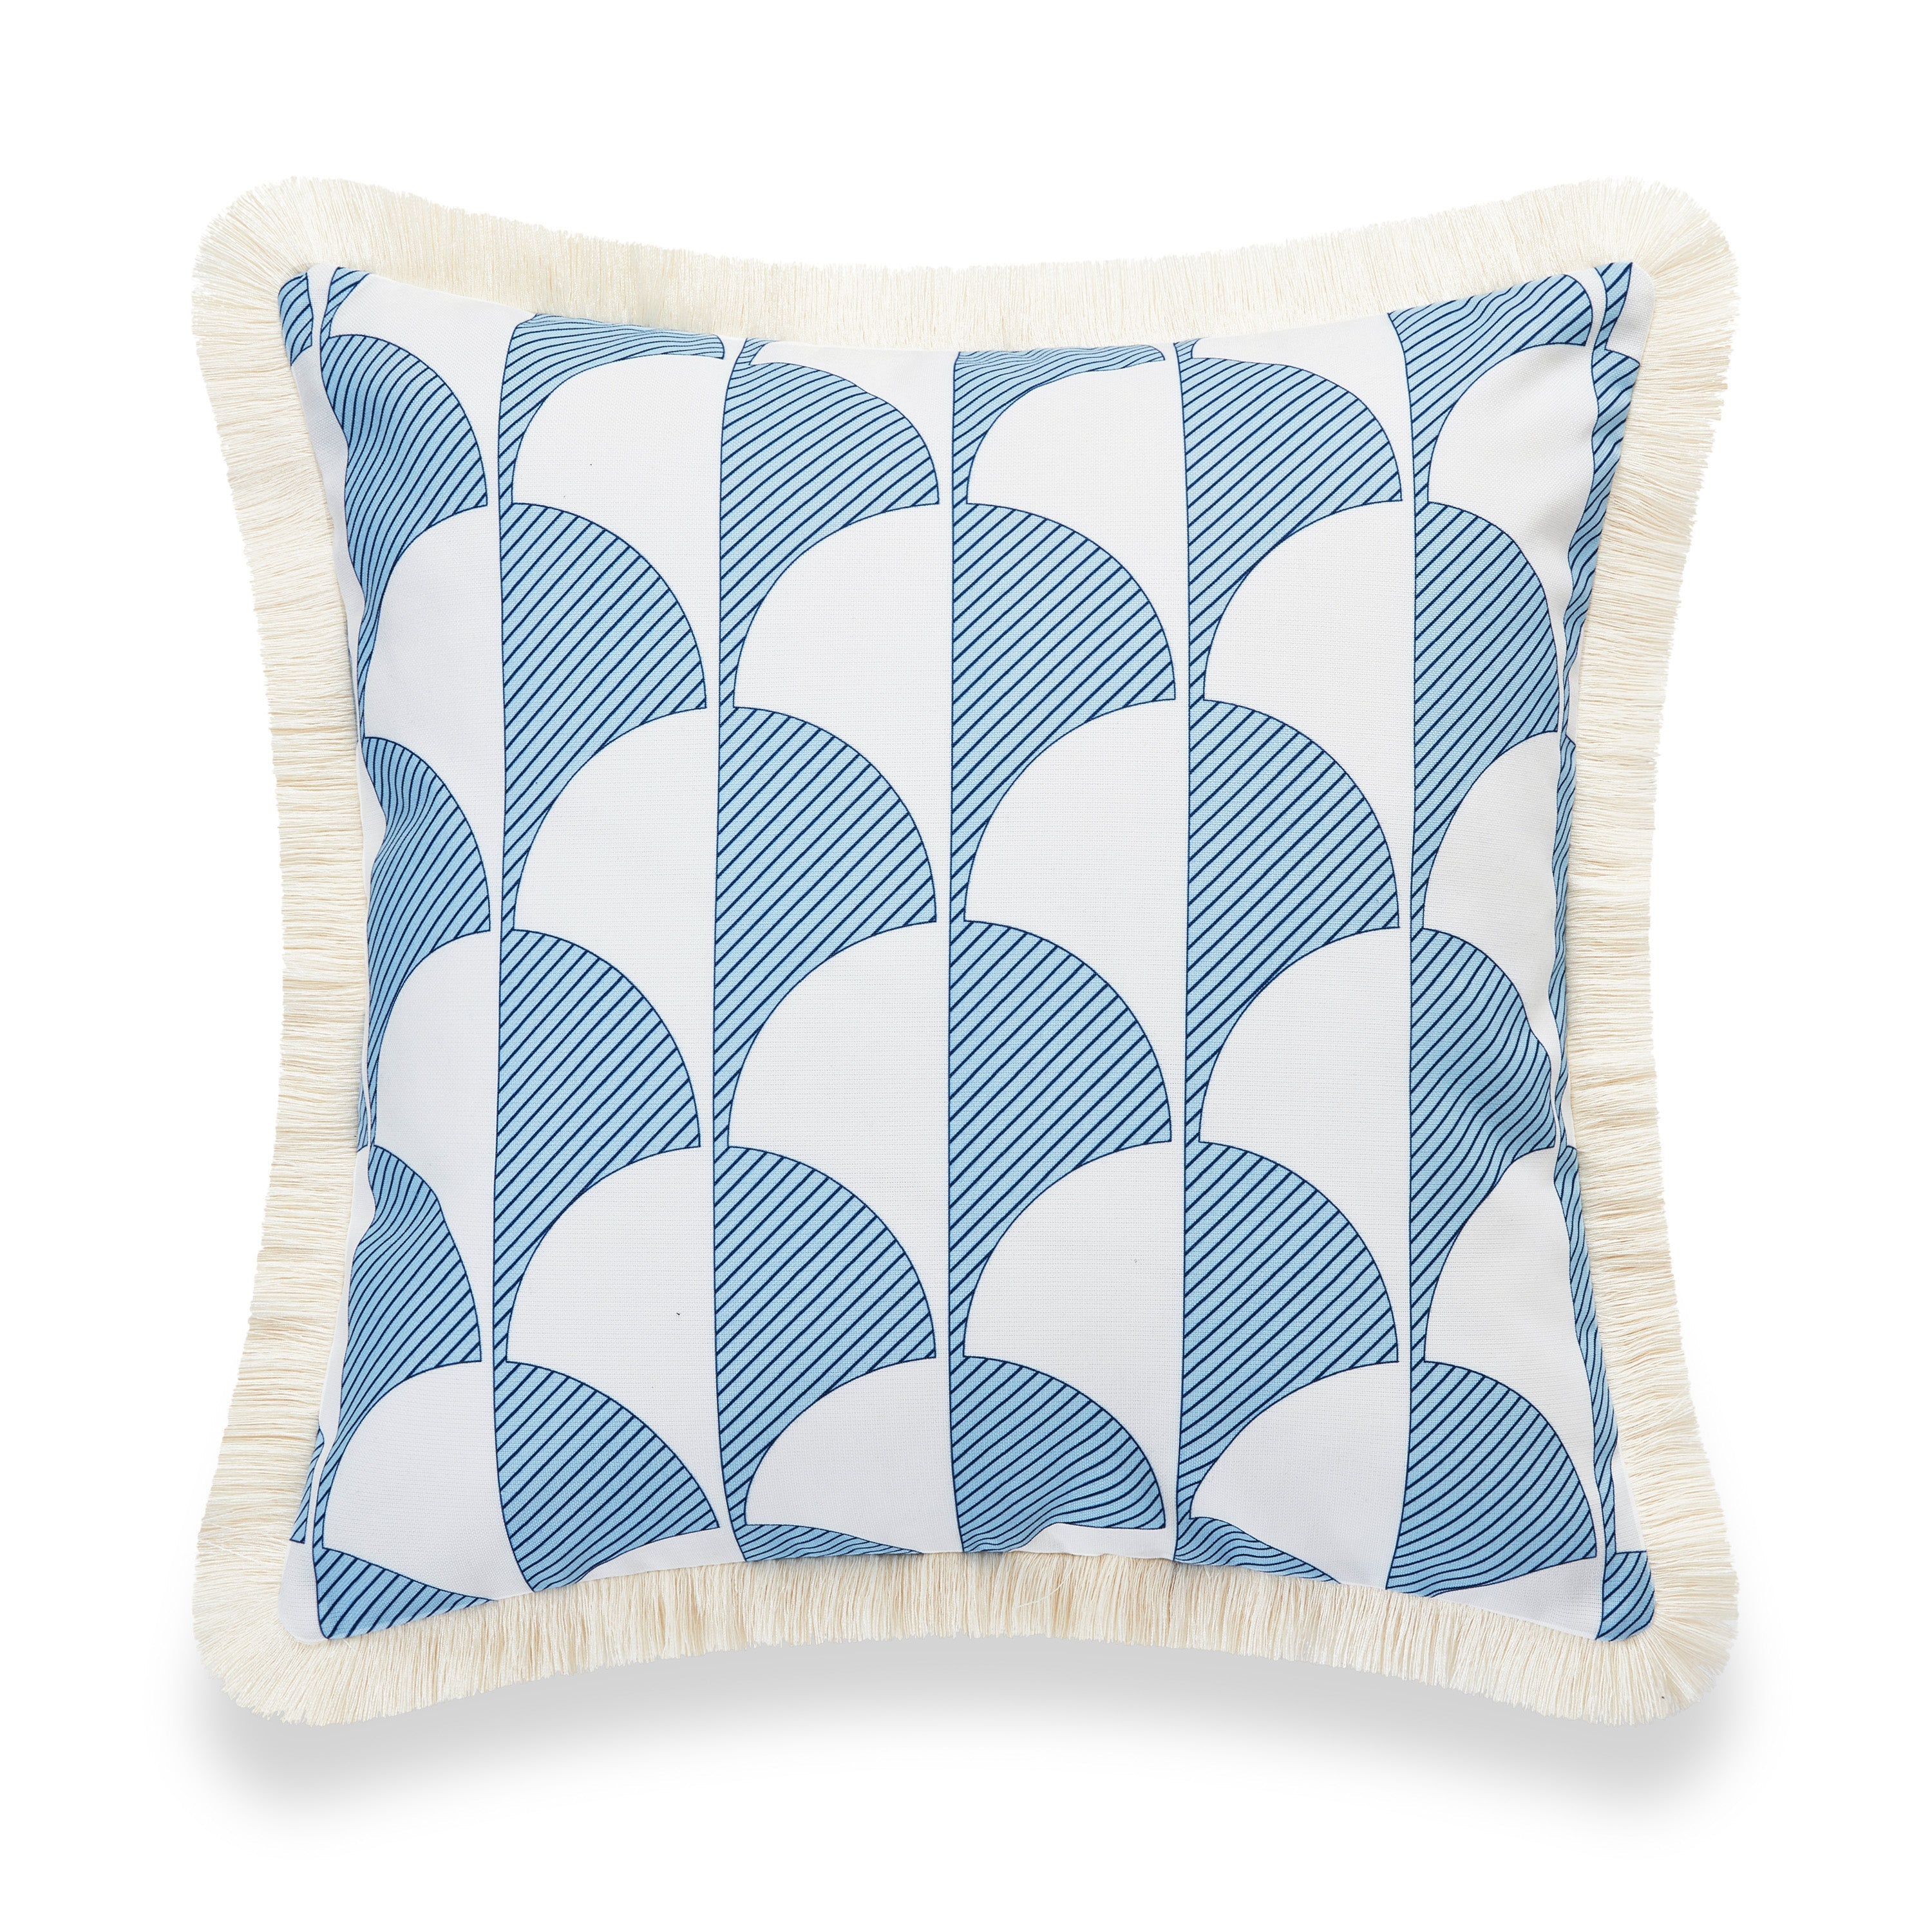 Coastal Hampton Style Indoor Outdoor Pillow Cover, Scale Motif Fringe, Baby Blue, 20"x20"